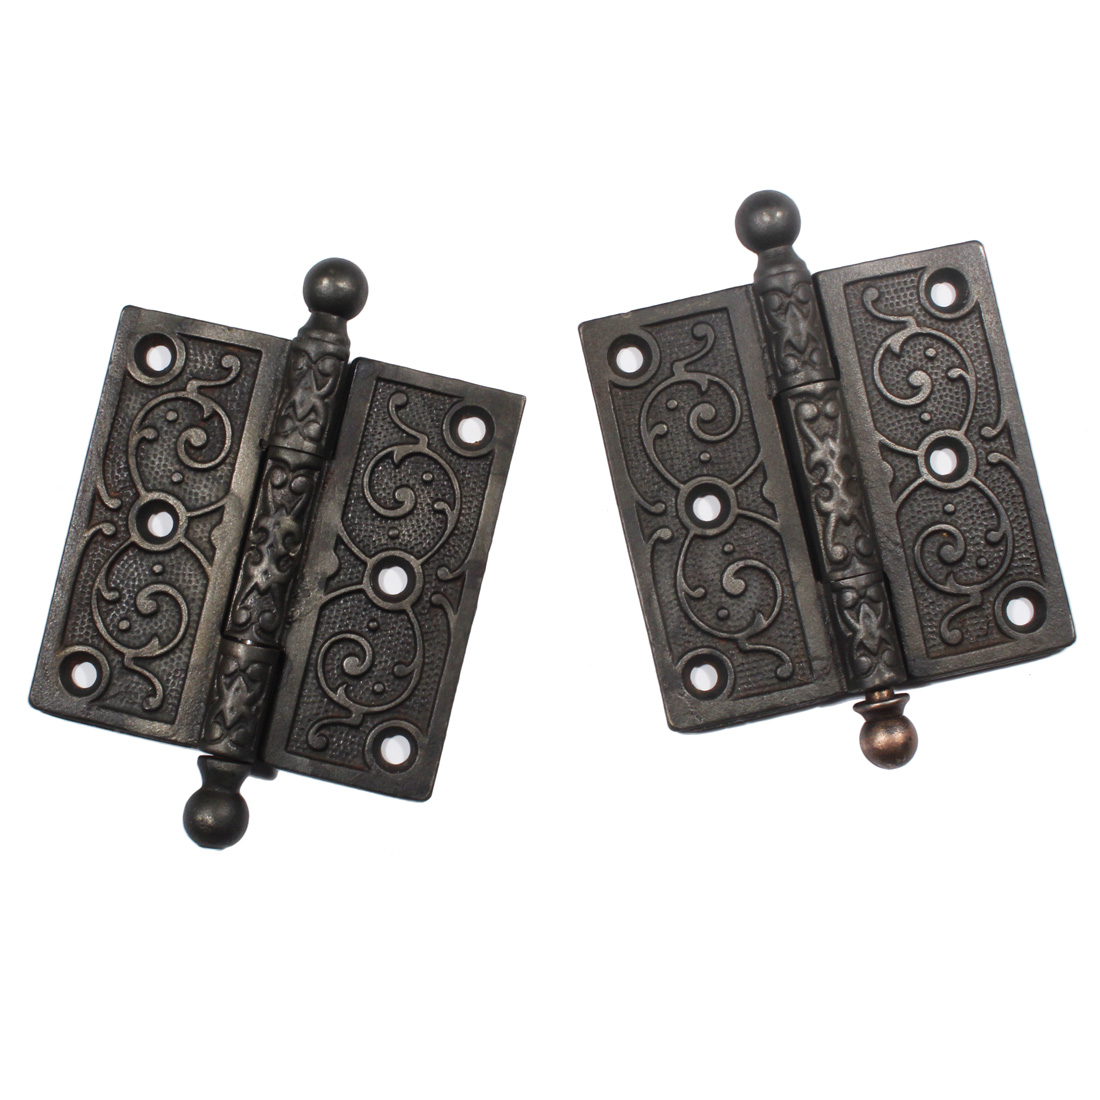 Pair of Reclaimed Decorative Cast Iron 3.5” Hinges, Antique Hardware -  Antique Hardware, Hinges, Recent Arrivals - The Preservation Station